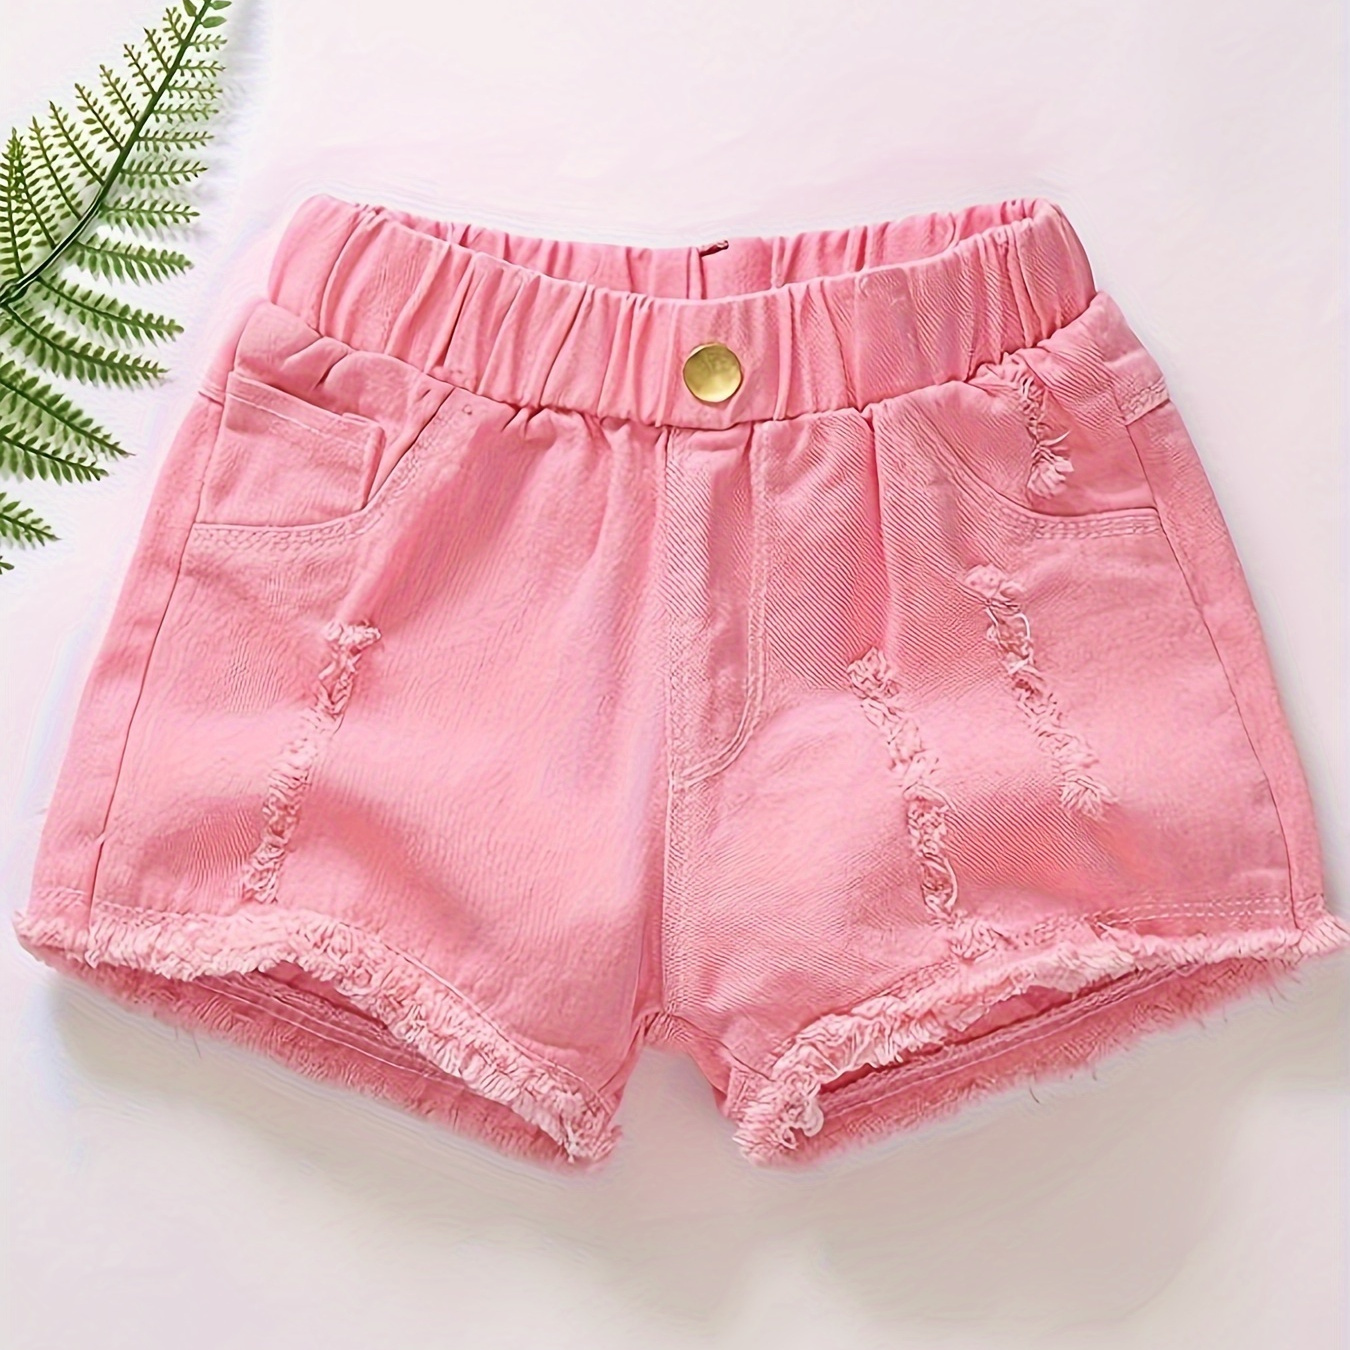 

Girls' Summer Cotton Denim Shorts, Multicolor Frayed Hem, Elastic Waistband, Distressed Jean Hot Pants, Casual Stylish Candy Colors Kids Shorts For Outdoor Play & Party